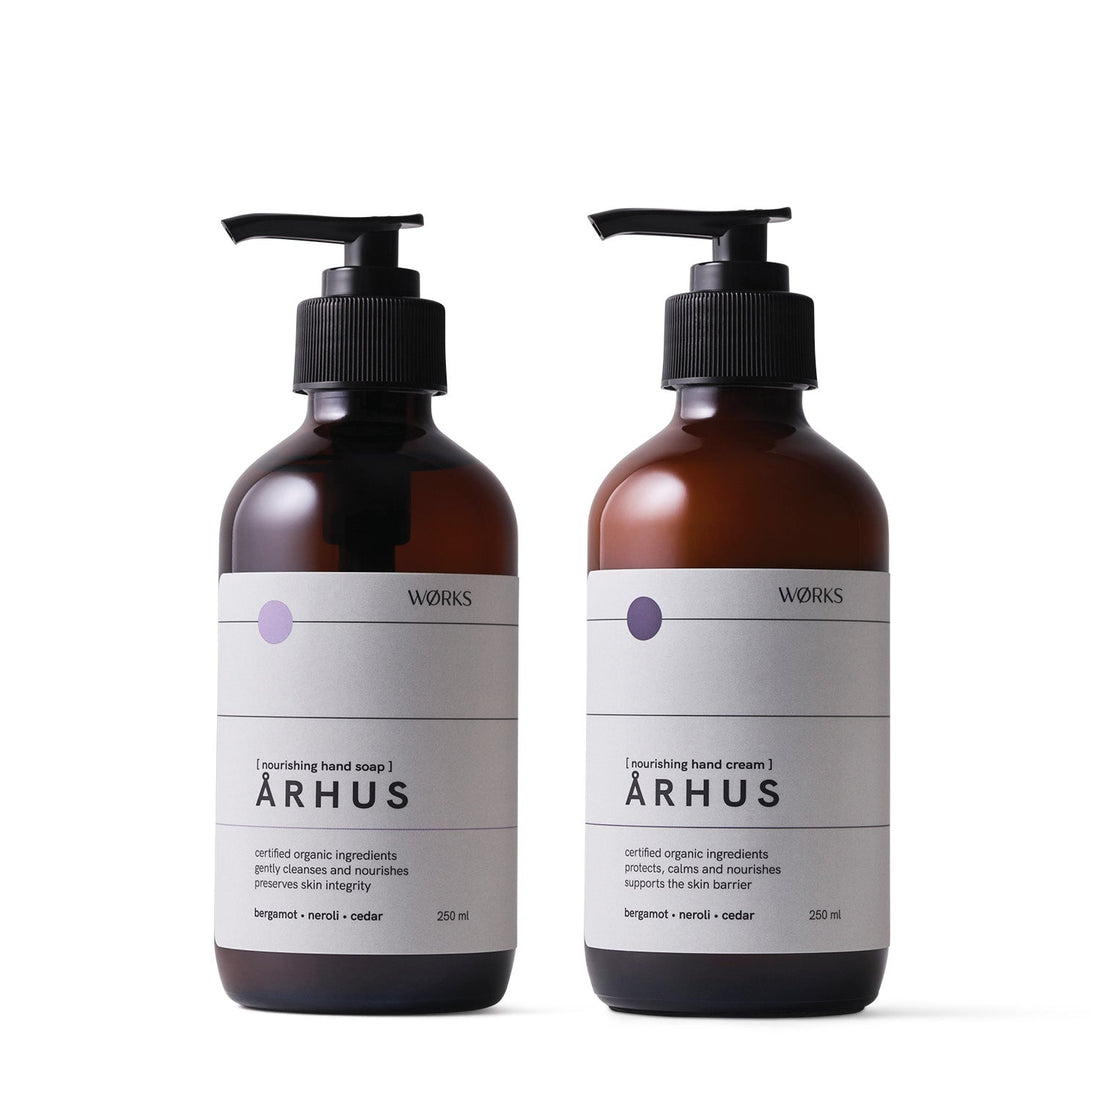 WØRKS hand duo high performance skin care